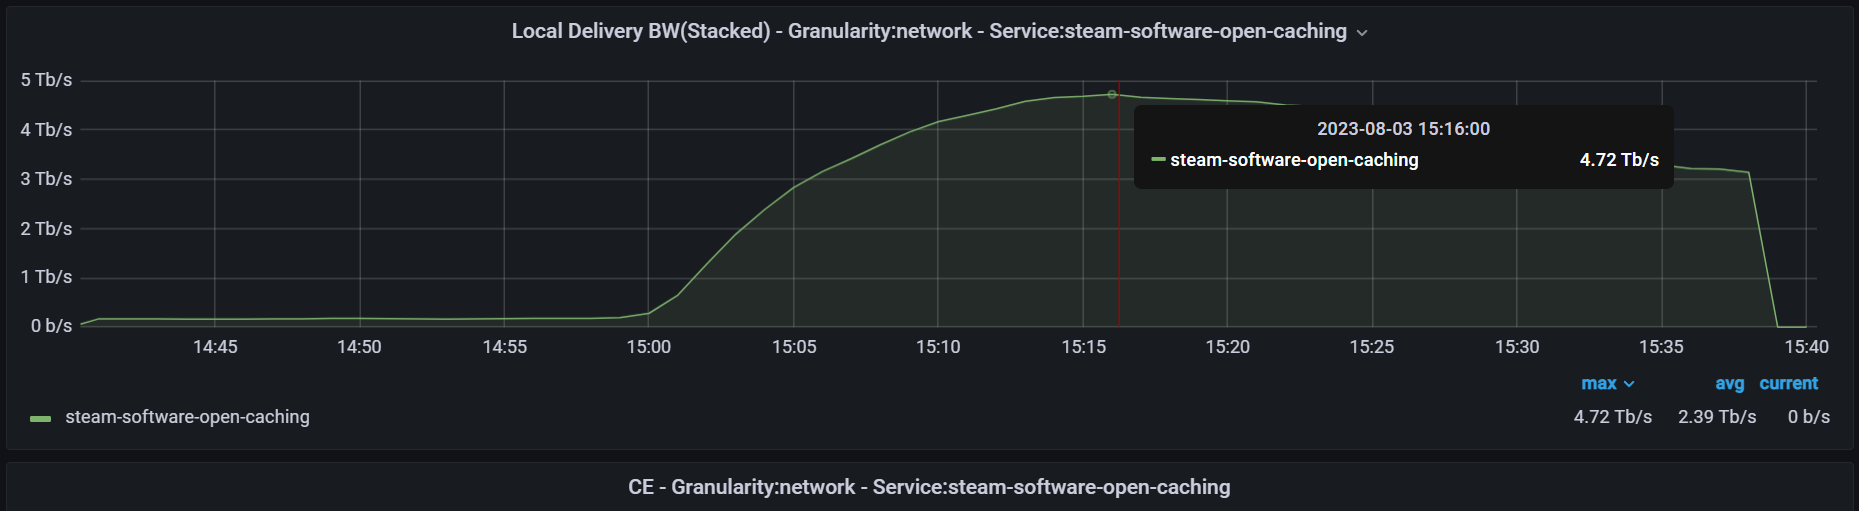 Open Caching Delivery of 'Baldur's Gate 3' at a tier 1 US ISP Peaked at Nearly 5 Tbps on August 3